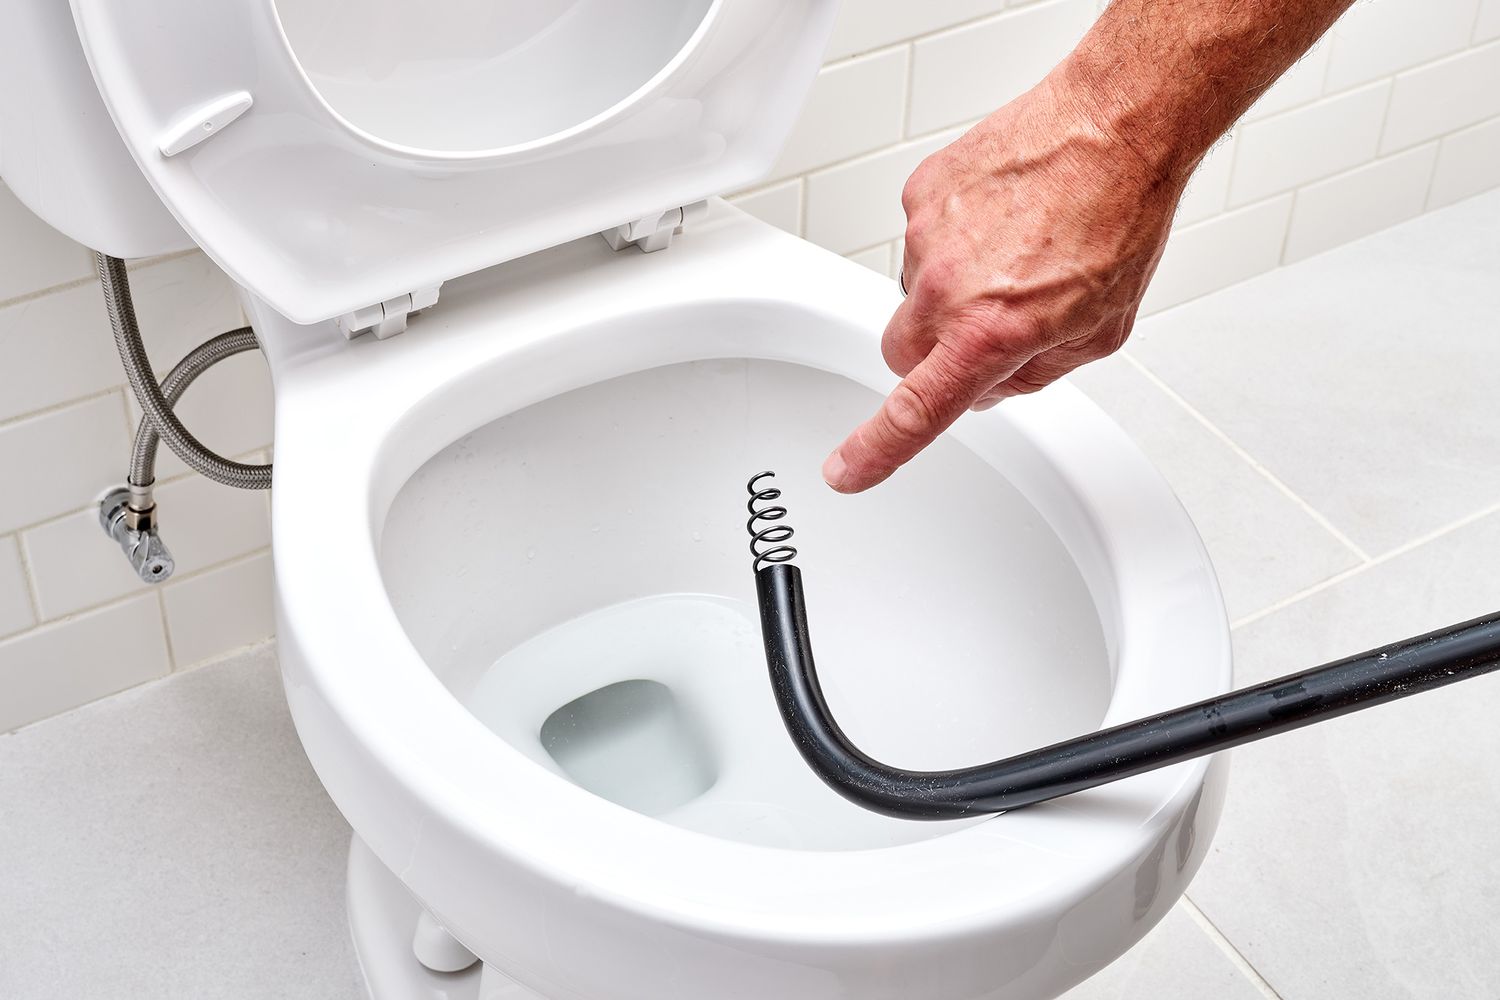 Toilet auger placed on toilet bowl with curled cable showing at end